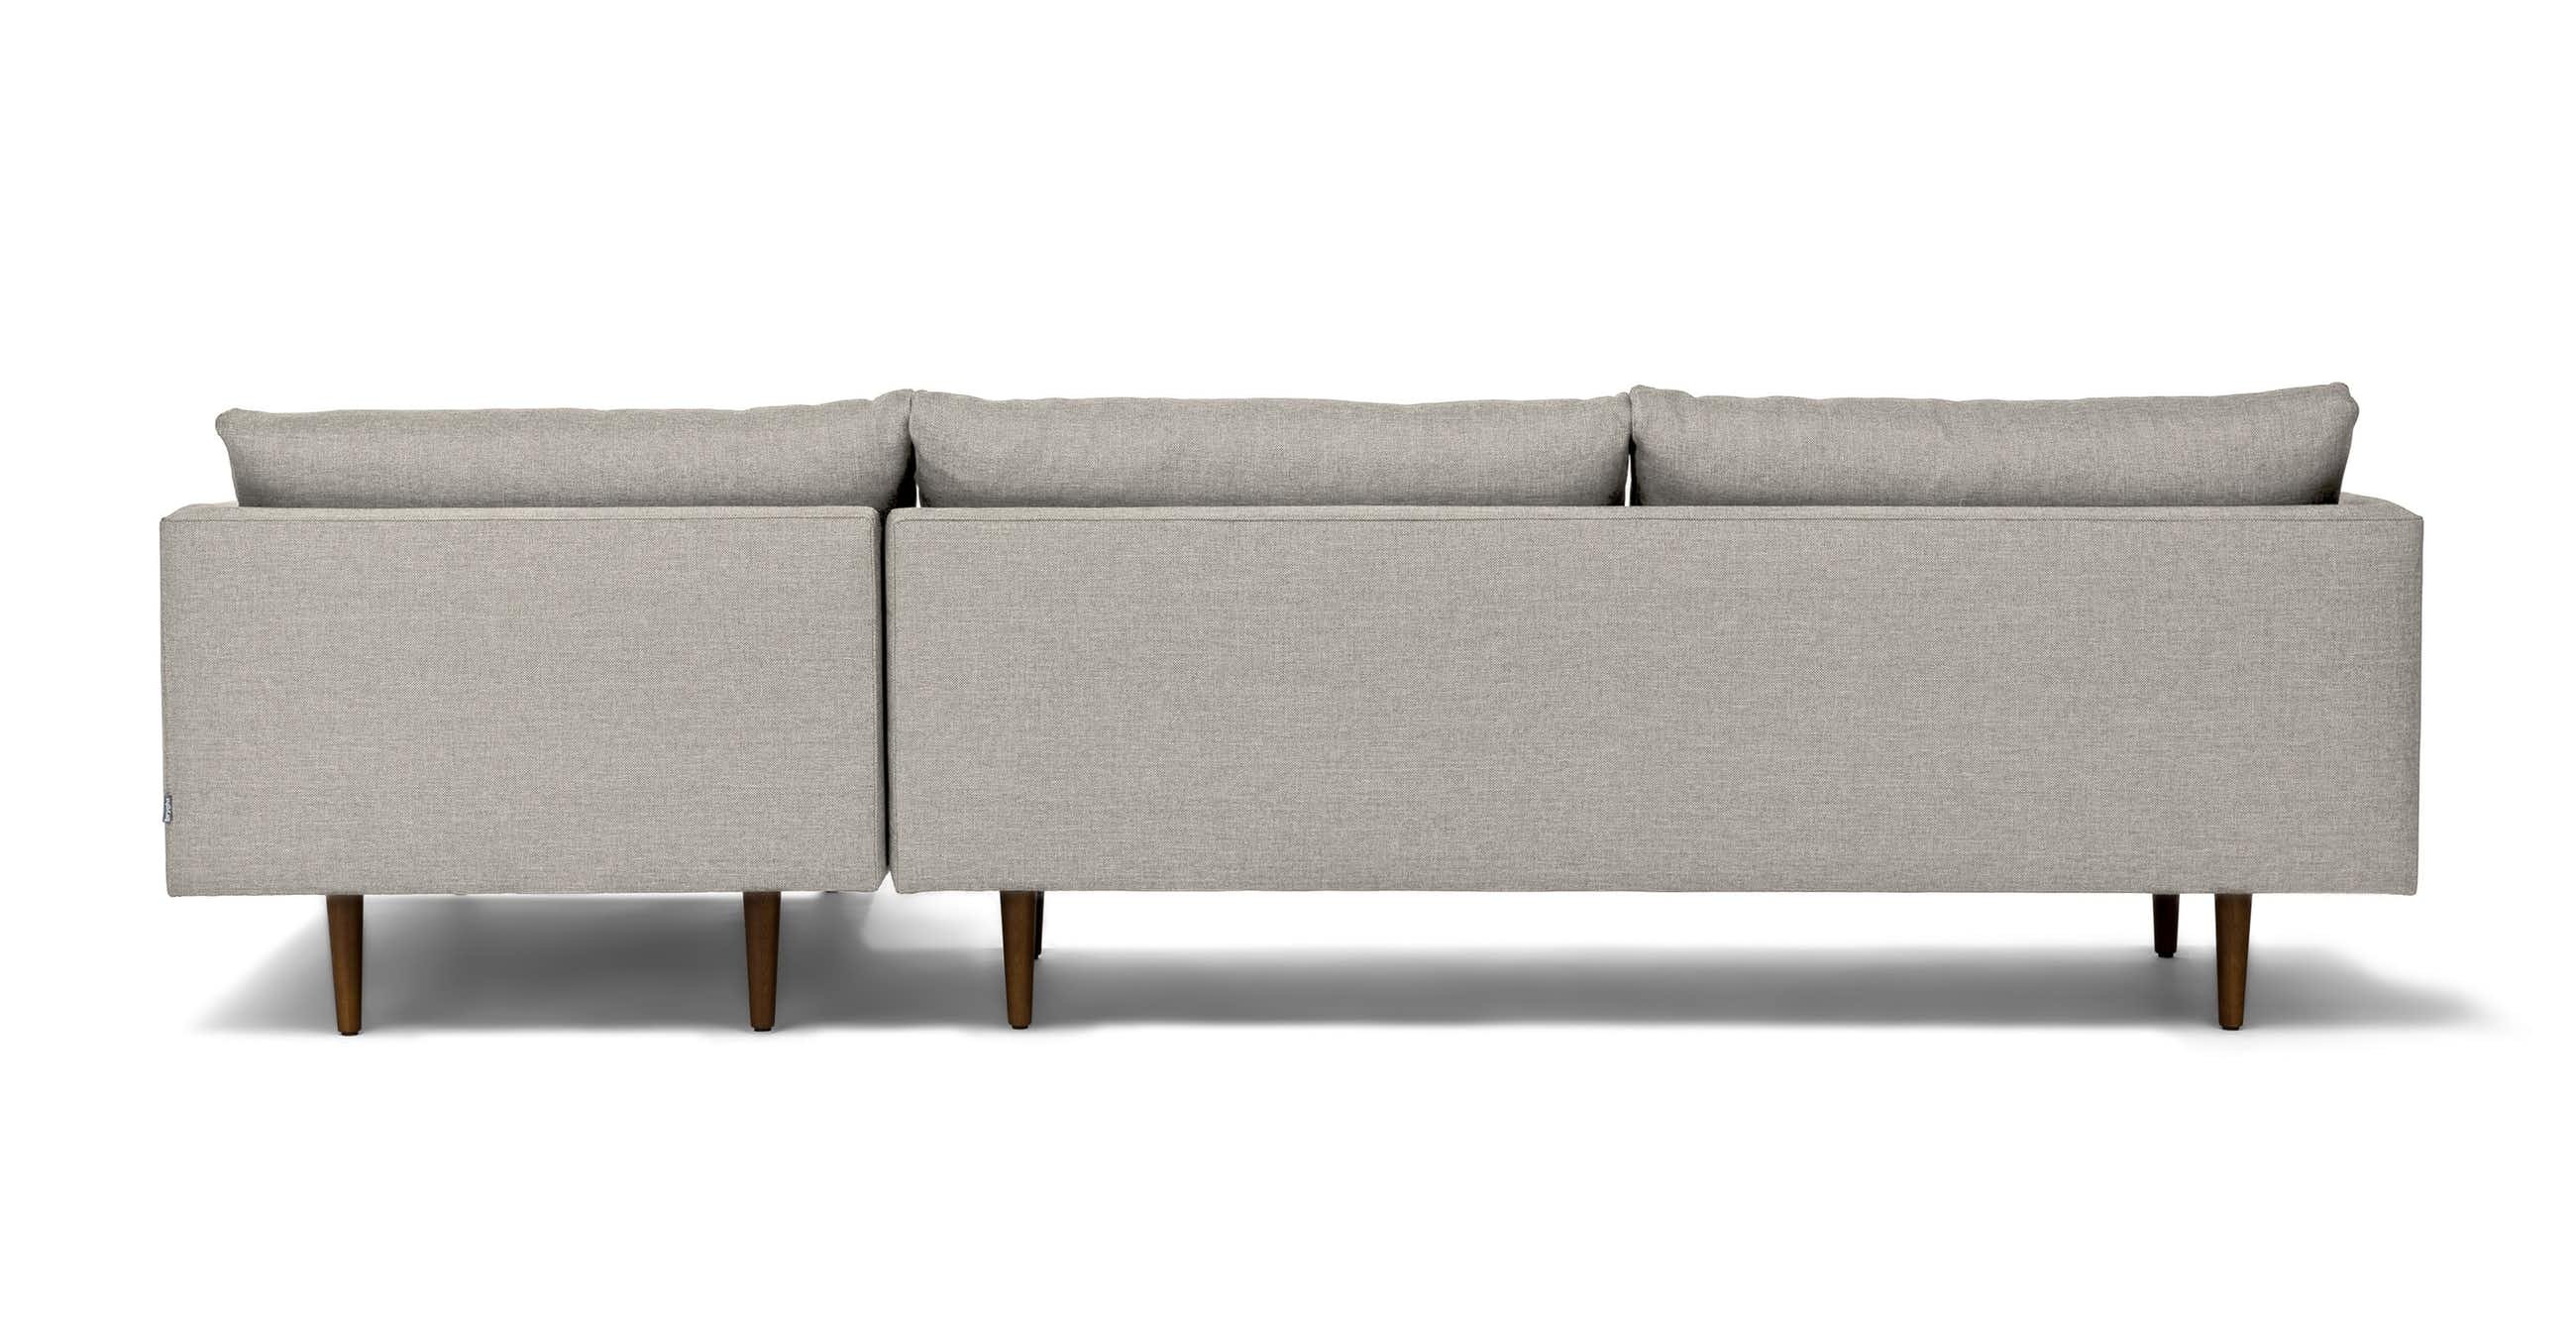 Burrard Seasalt Gray Right Sectional - Image 2